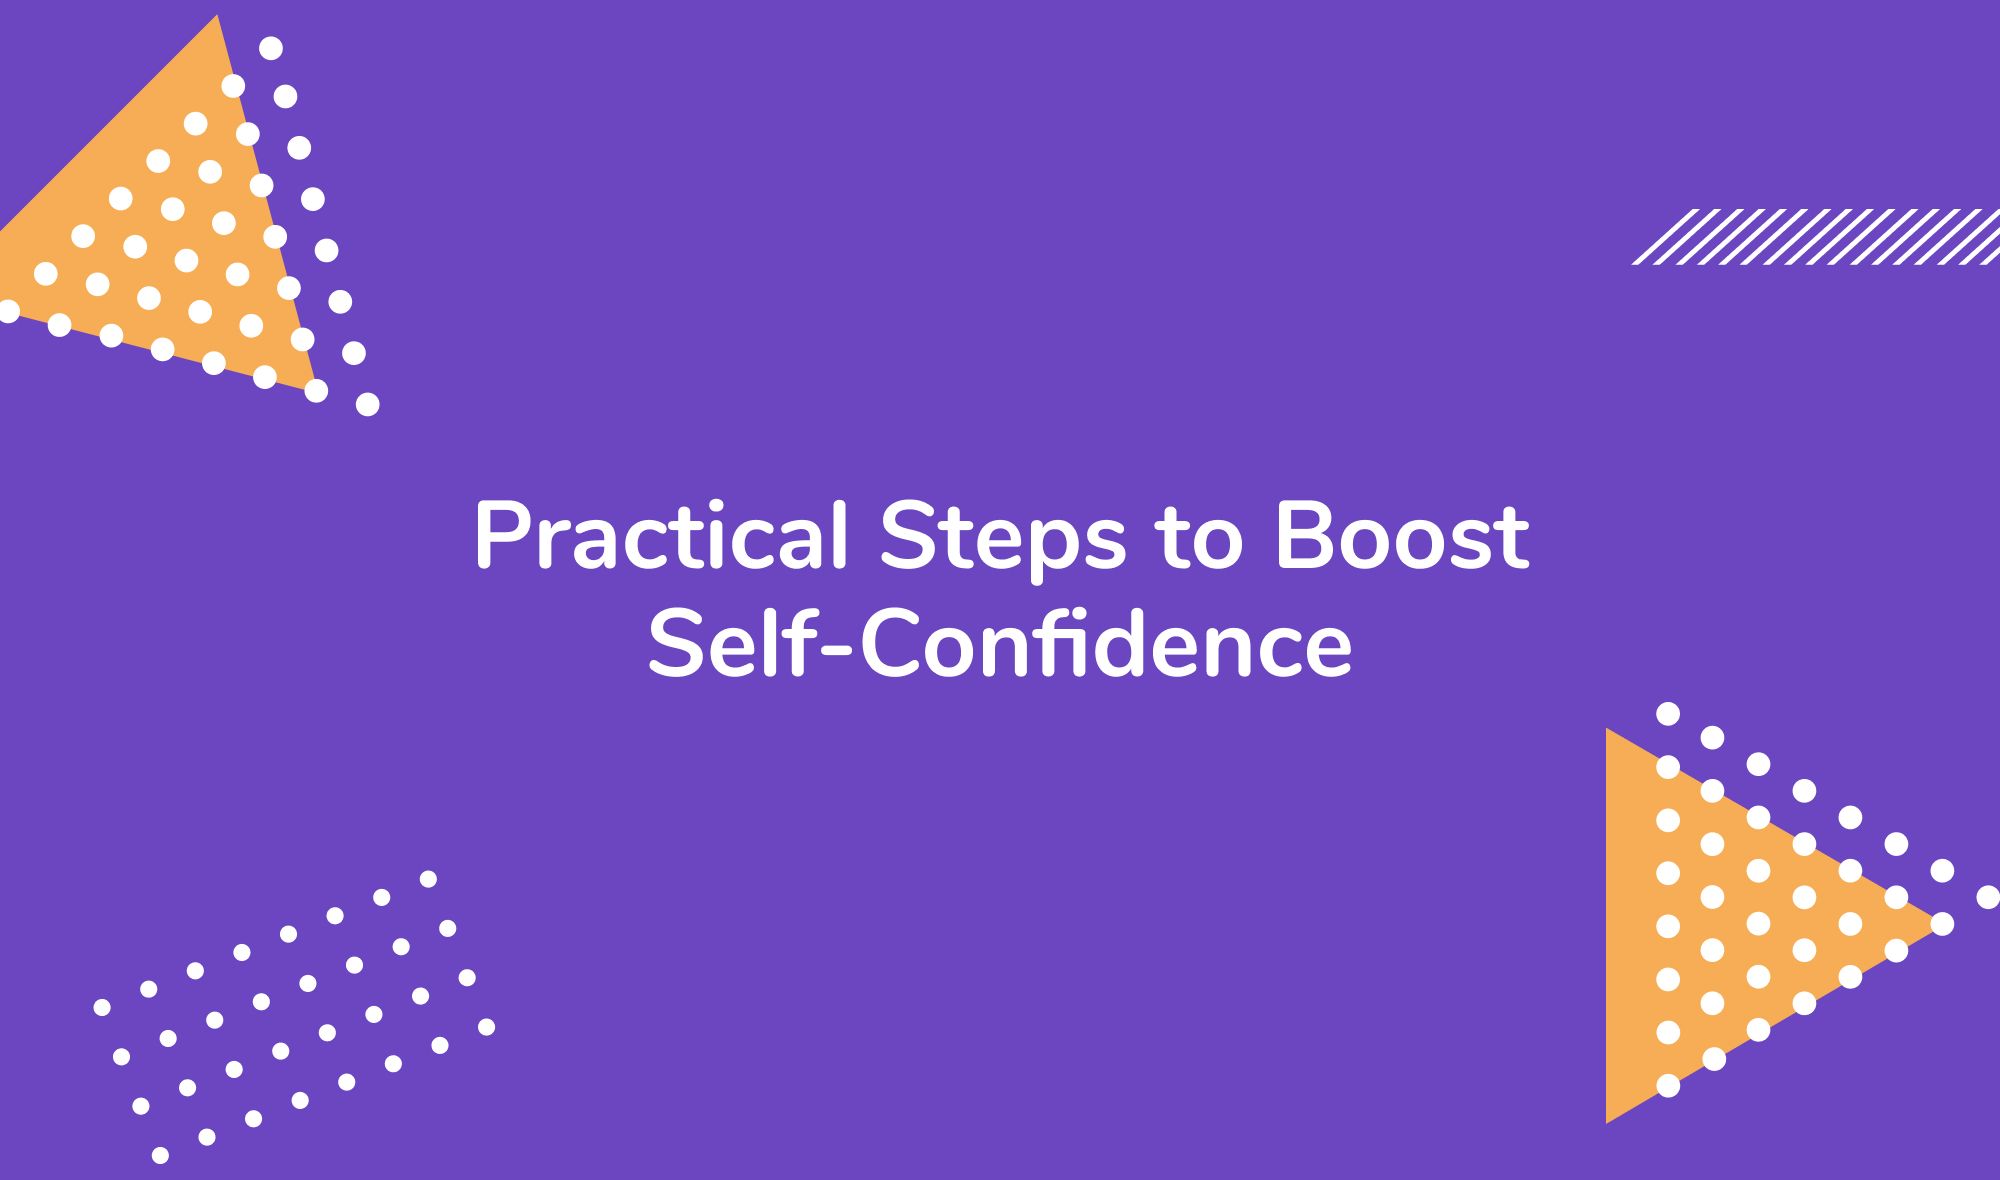 Practical Steps to Boost Self-Confidence in the Face of Rejection